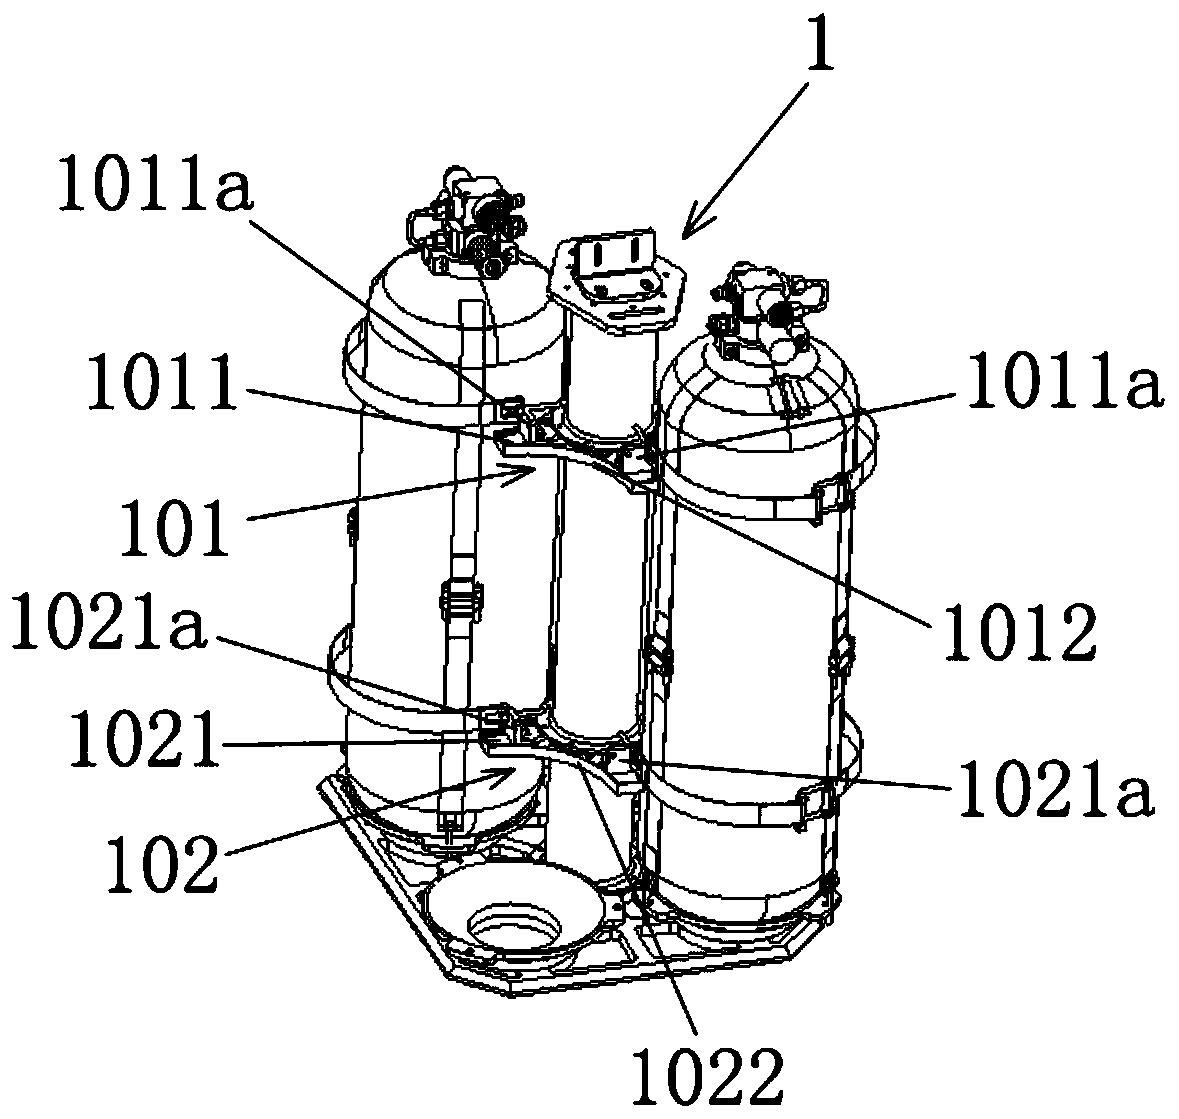 High-pressure gas cylinder carrying device for spacecraft